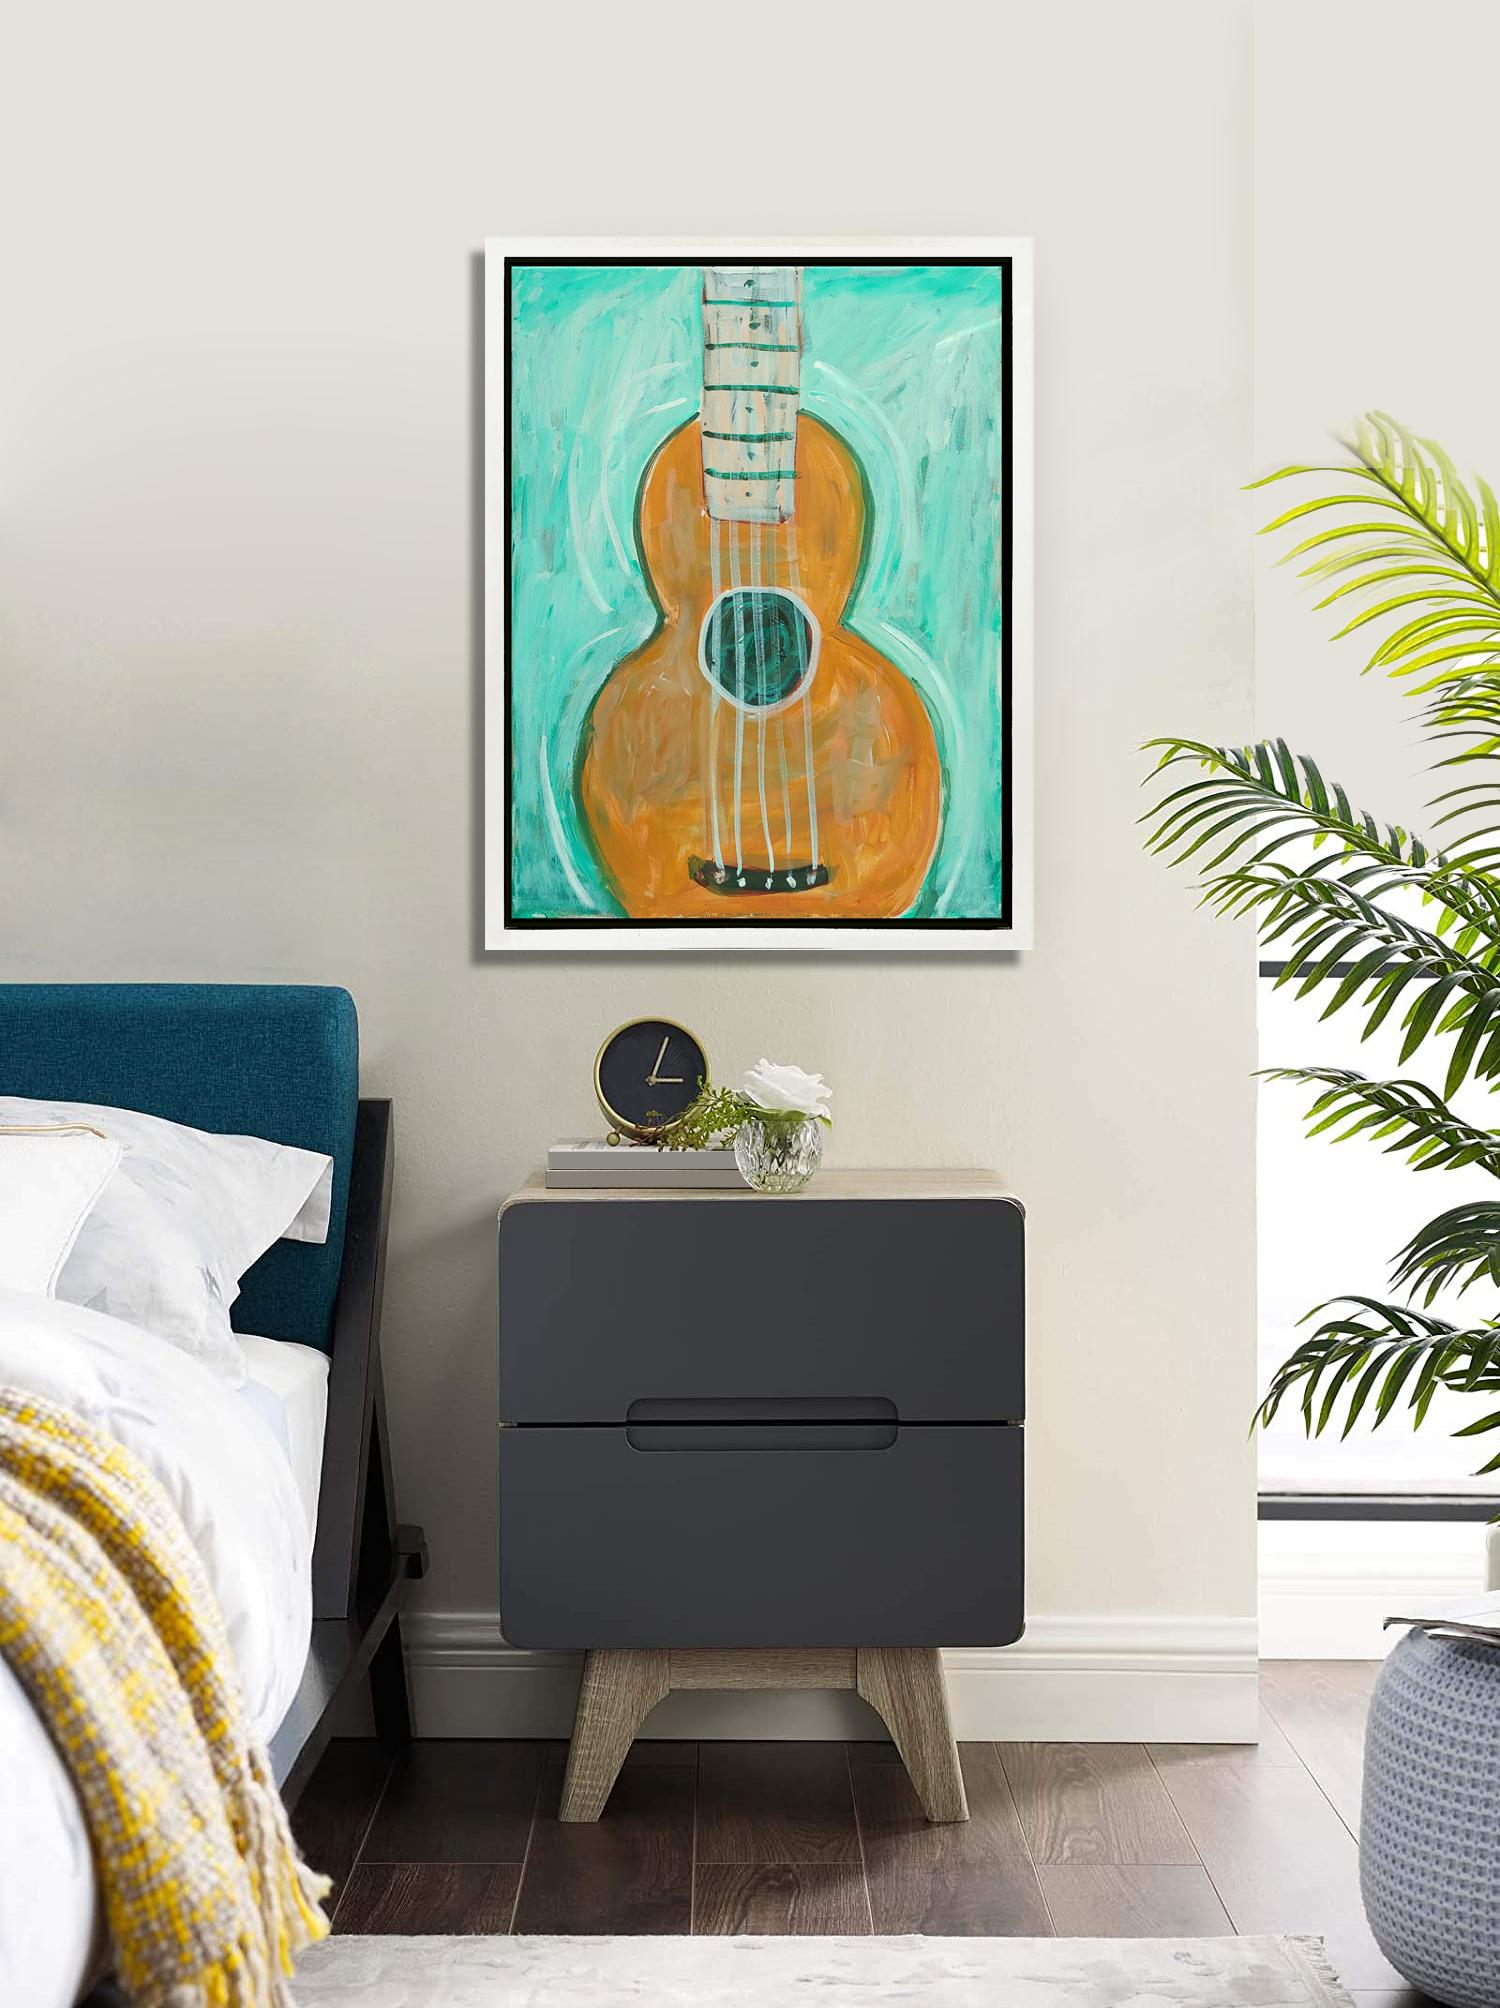 Guitar with Maple Neck  acrylic on canvas 26x20 framed - Painting by Kim Simmonds